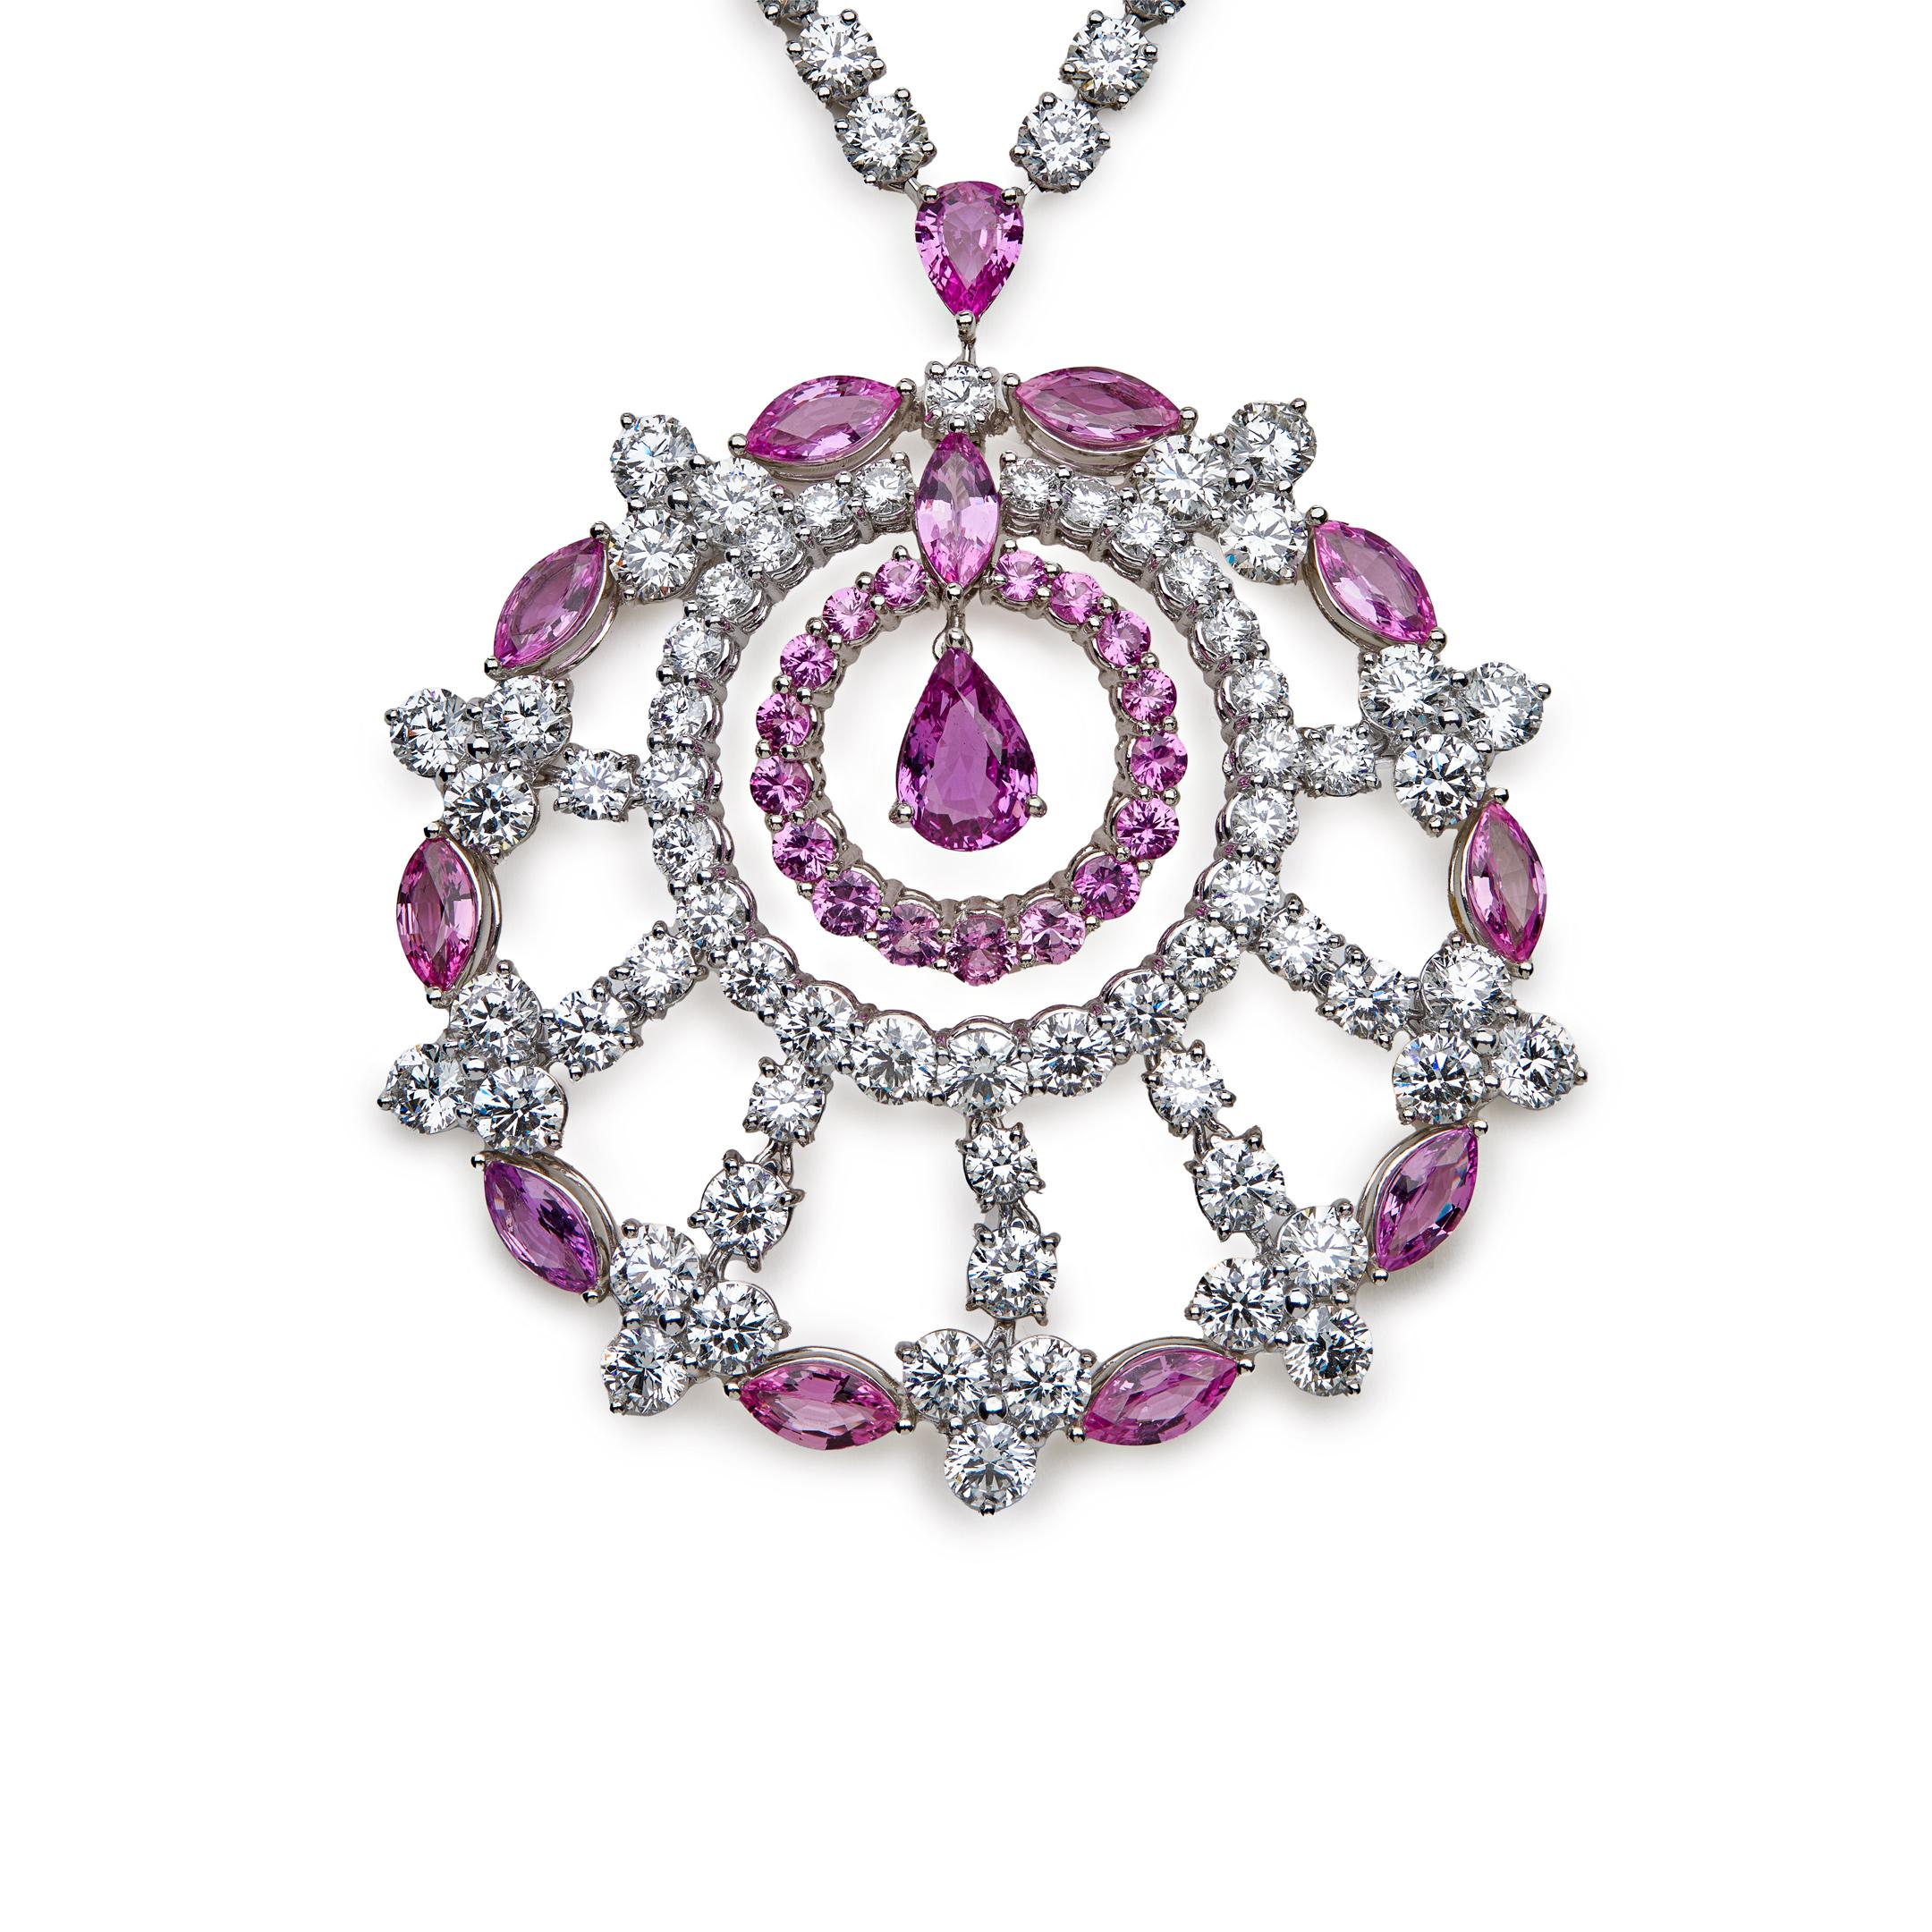 Graff Pink Marquise White Gold Large Snowflake Necklace with White Round Diamonds and Pink Marquise and Pear shape Sapphires.

Please contact us for more information. 

*To keep your jewelry in excellent condition, avoid all exposure to moisture,